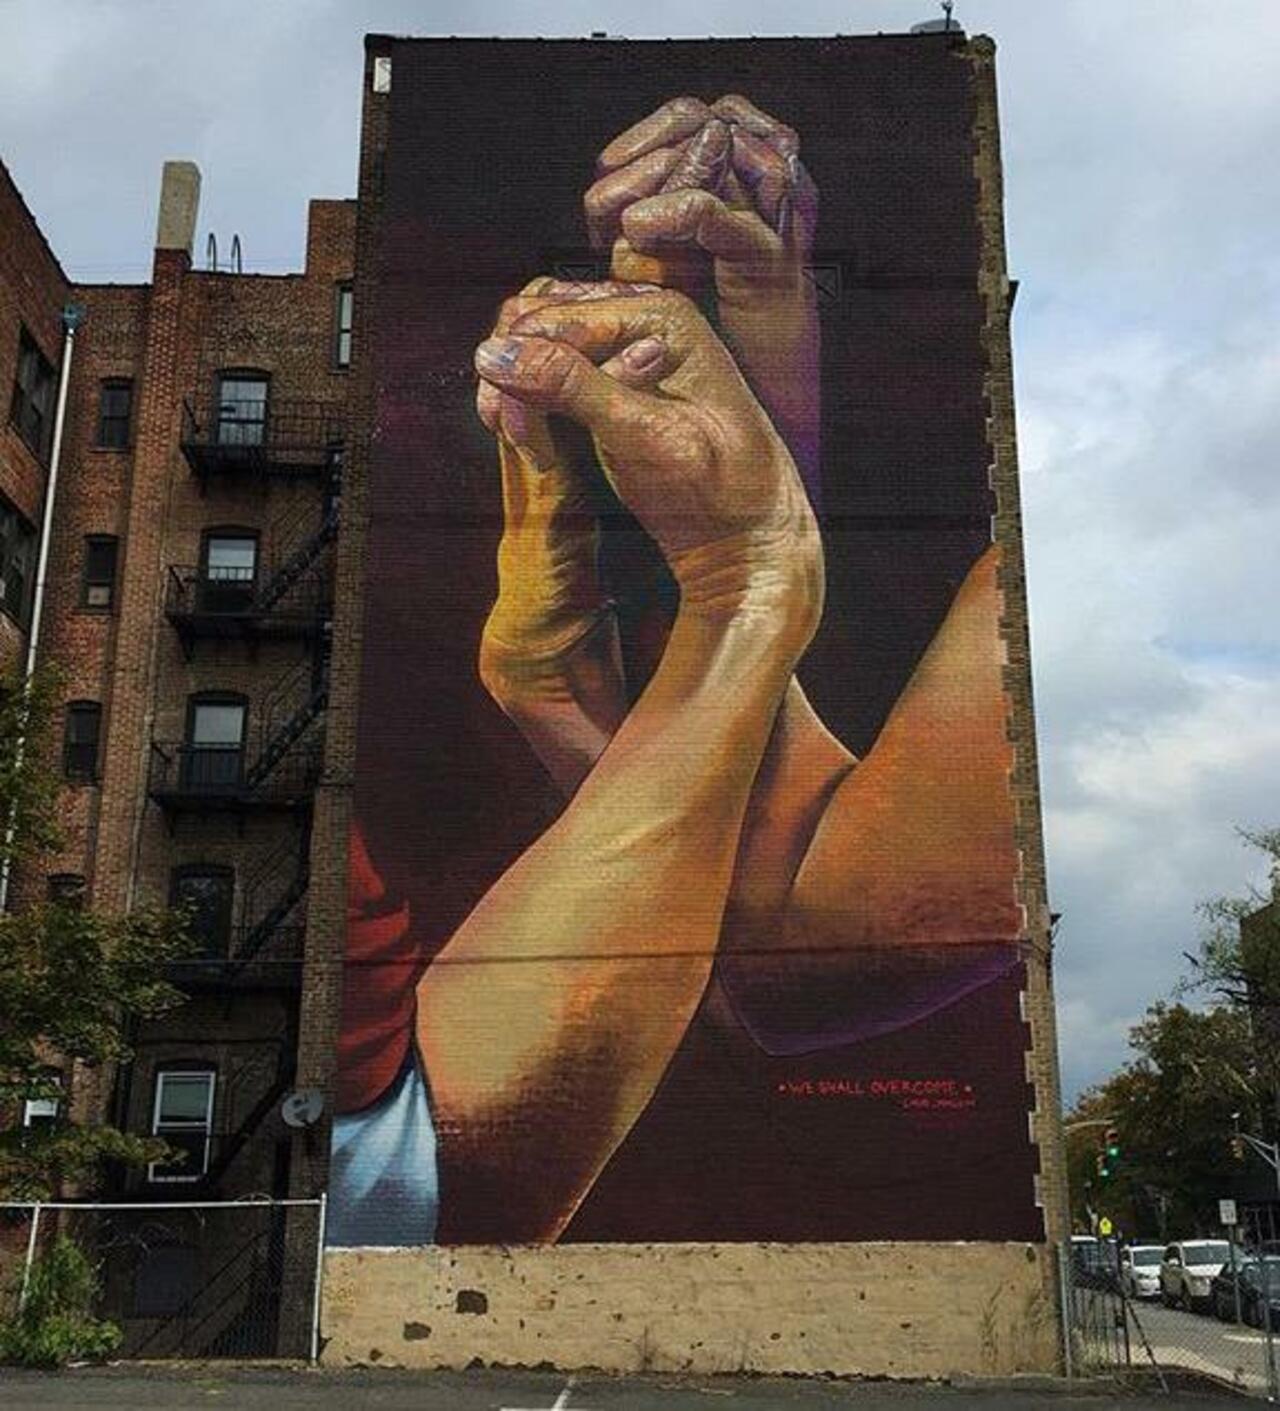 New Street Art by CaseMaclaim in Jersey City for the TheBKcollective 

#art #graffiti #mural #streetart http://t.co/Xy8ezr5kkT